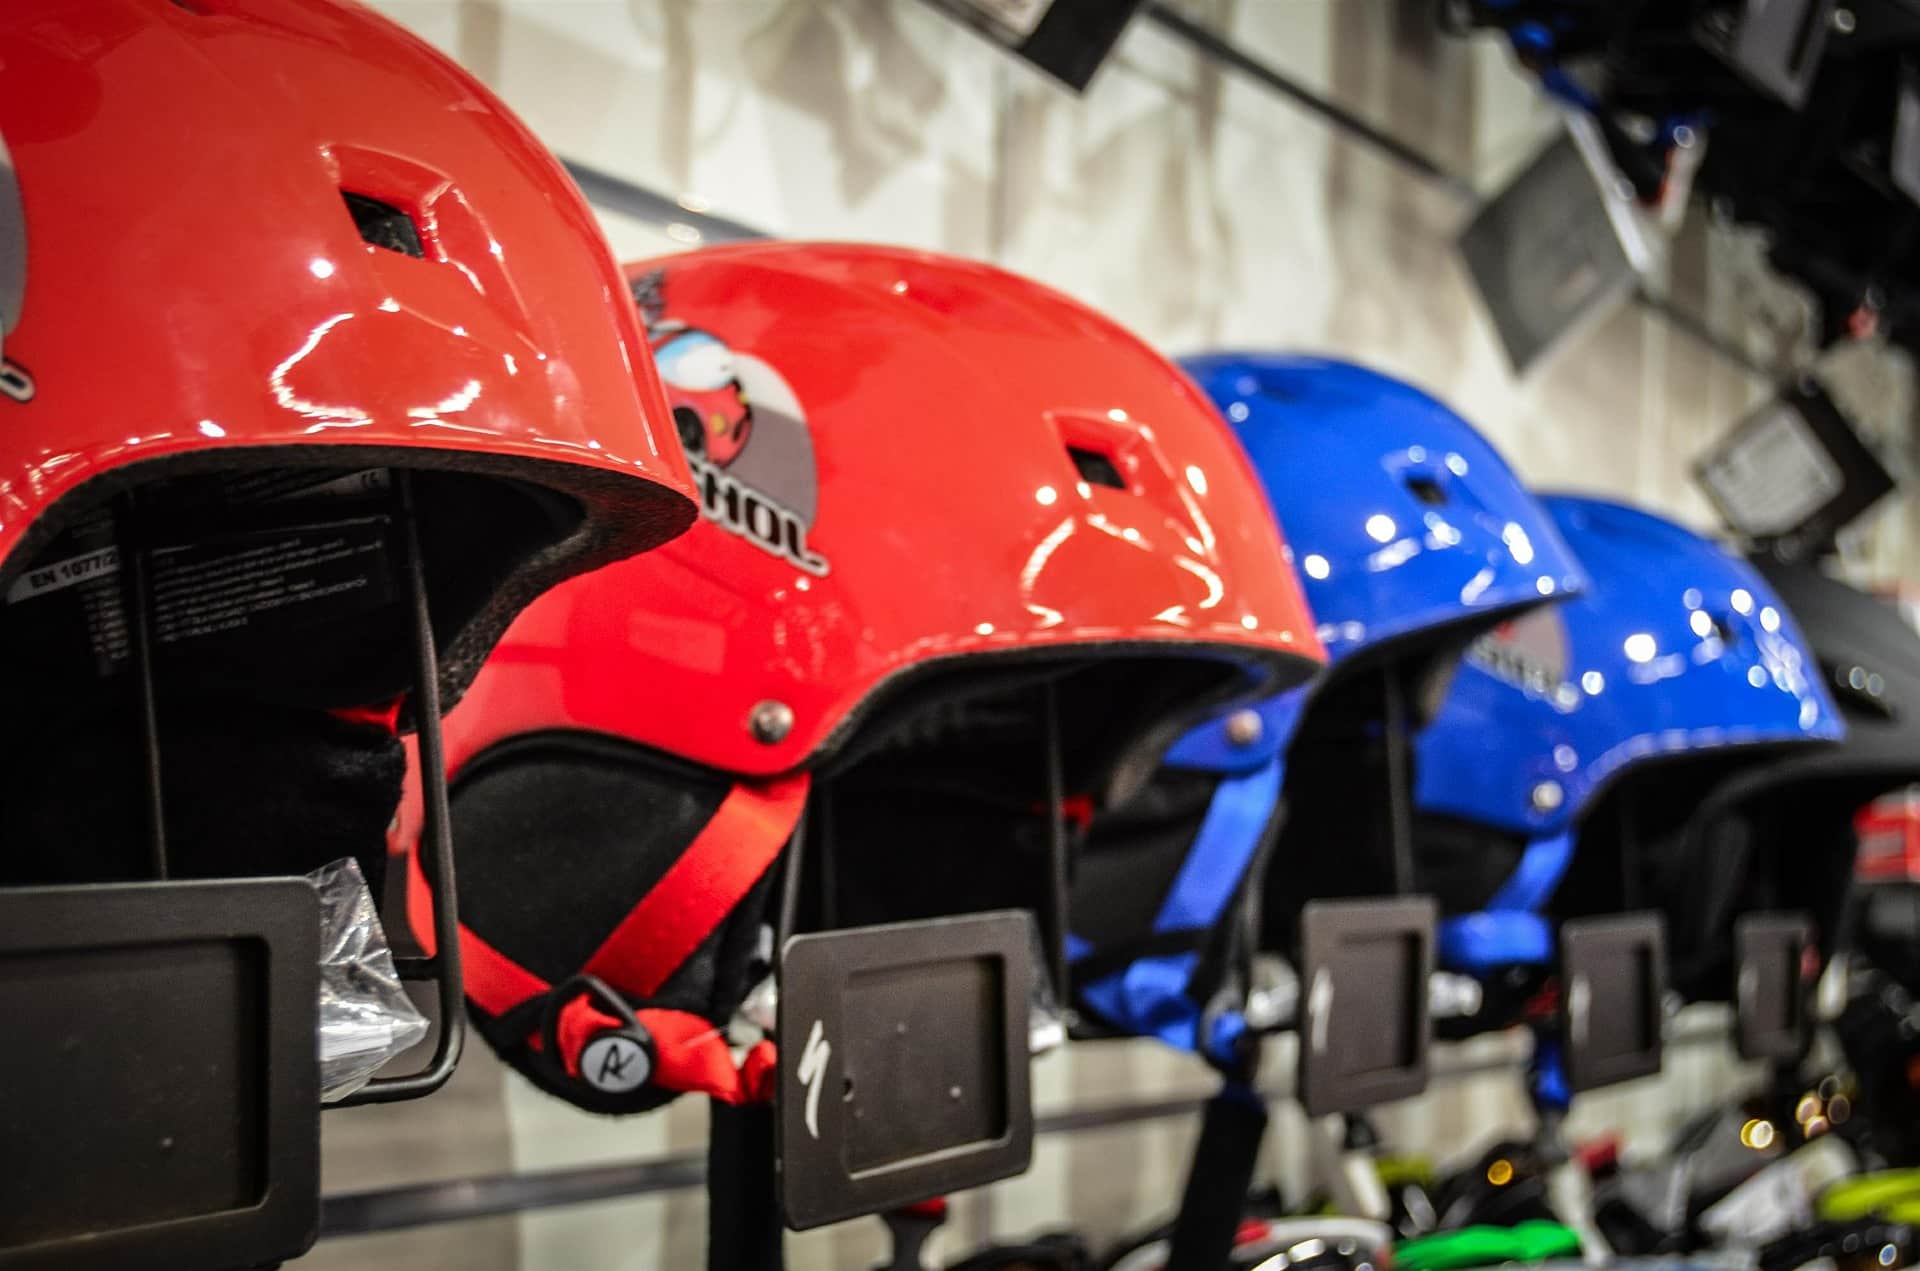 Row of red and blue ski helmets